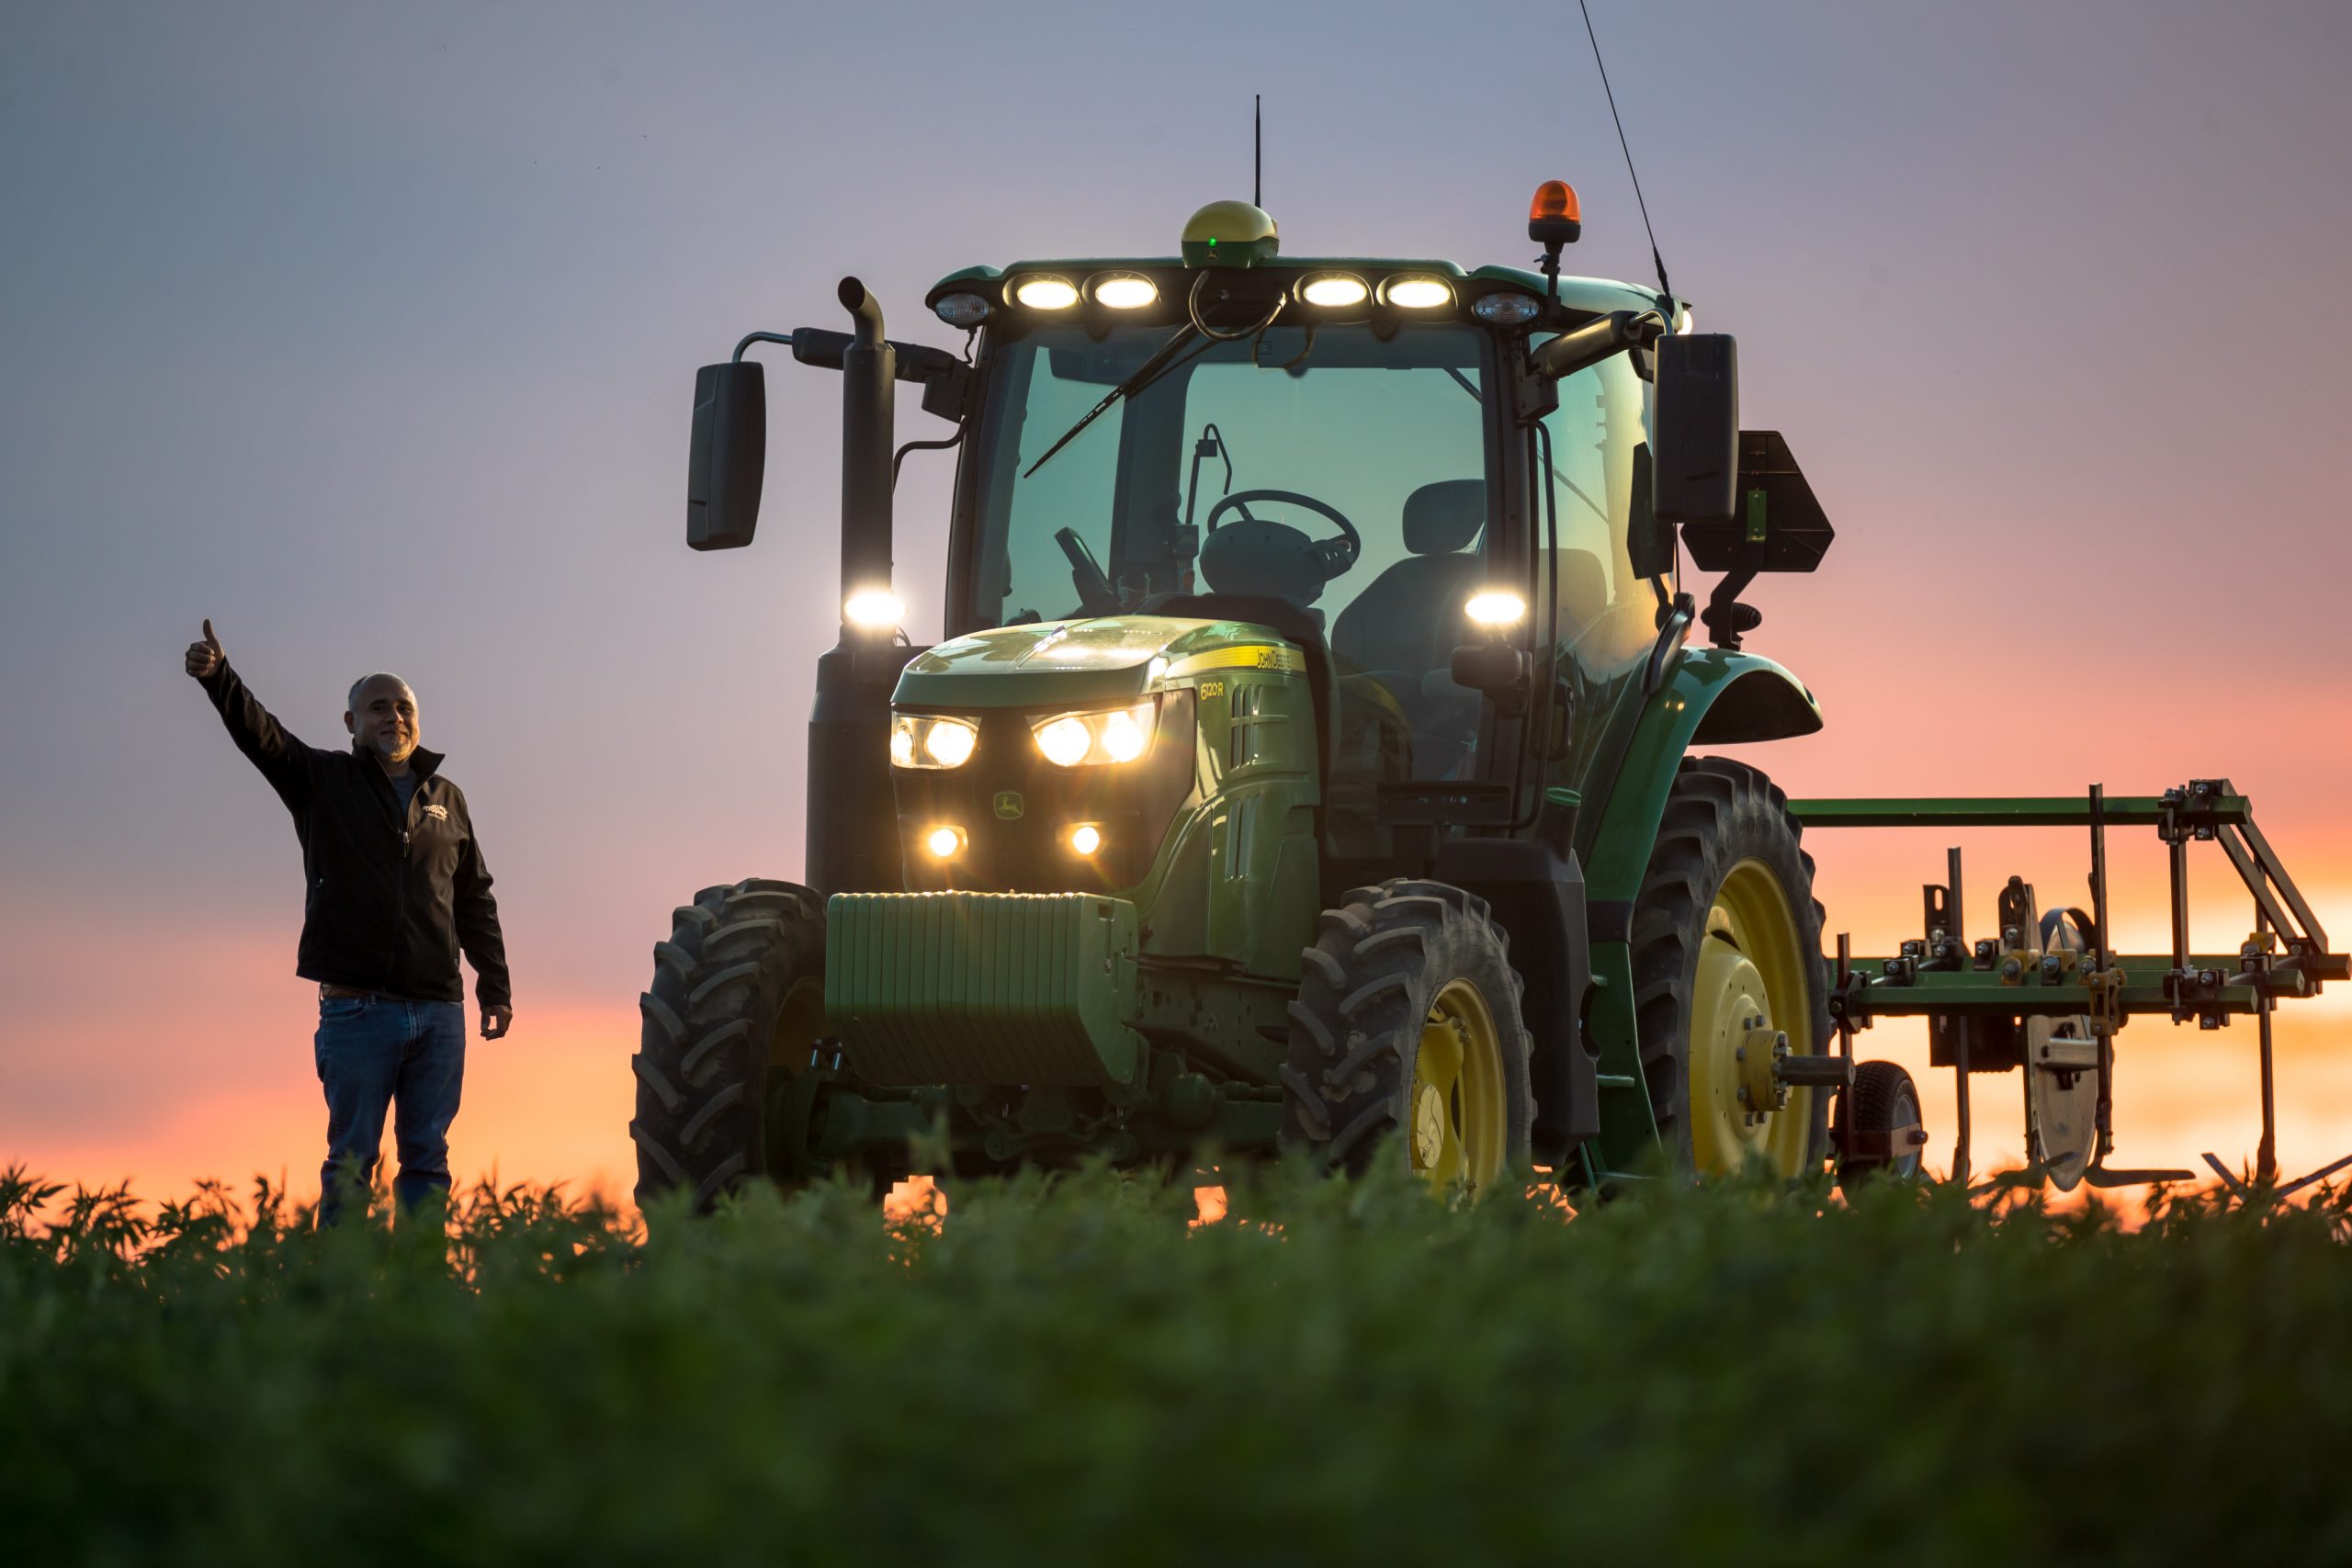 Luis Garcia, GPS Tractor Operator, gives the thumbs up. Luis has already started his day as the sun begins to rise. It’s business as usual to ensure a steady supply of crops destined for Nutrilite® brand products. Trout Lake Farm East, Ephrata, Wash, July 2020. Photo: Darwin Hintz